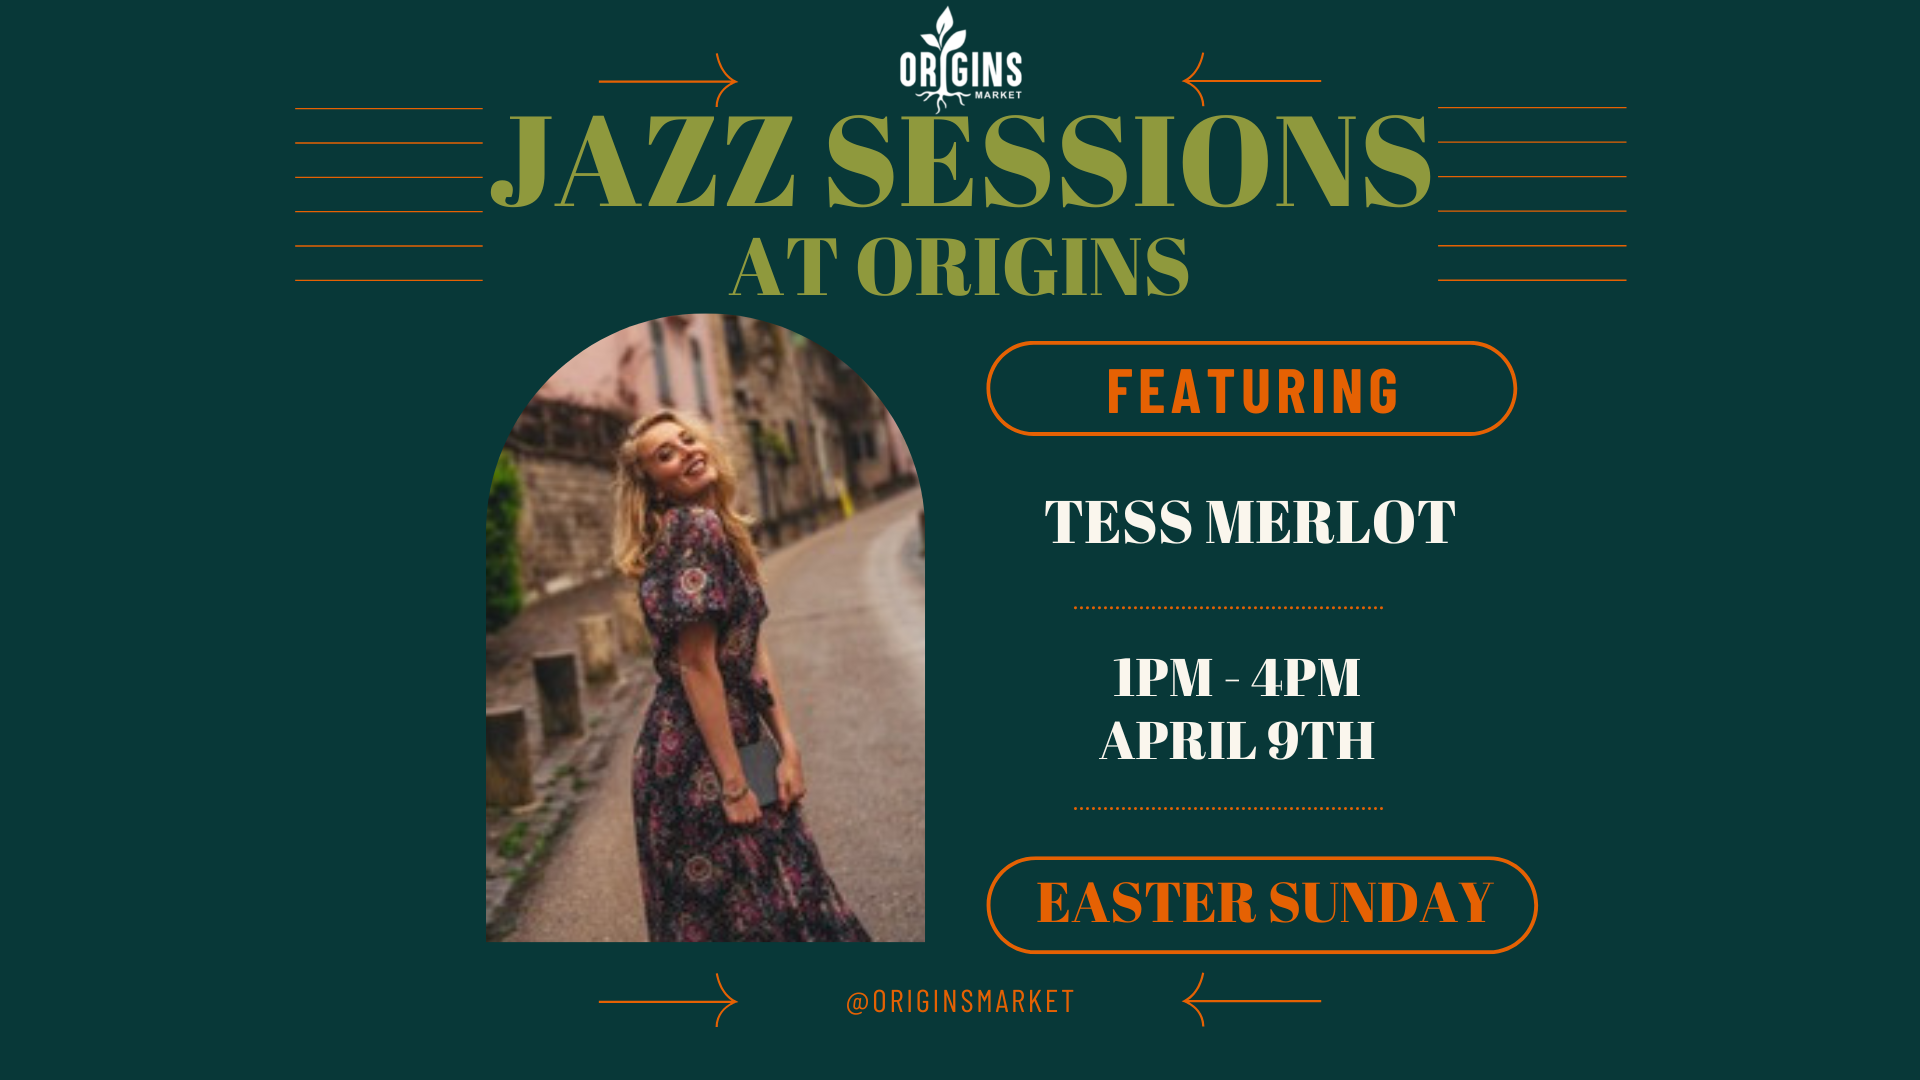 Jazz Sessions Featuring Tess Merlot